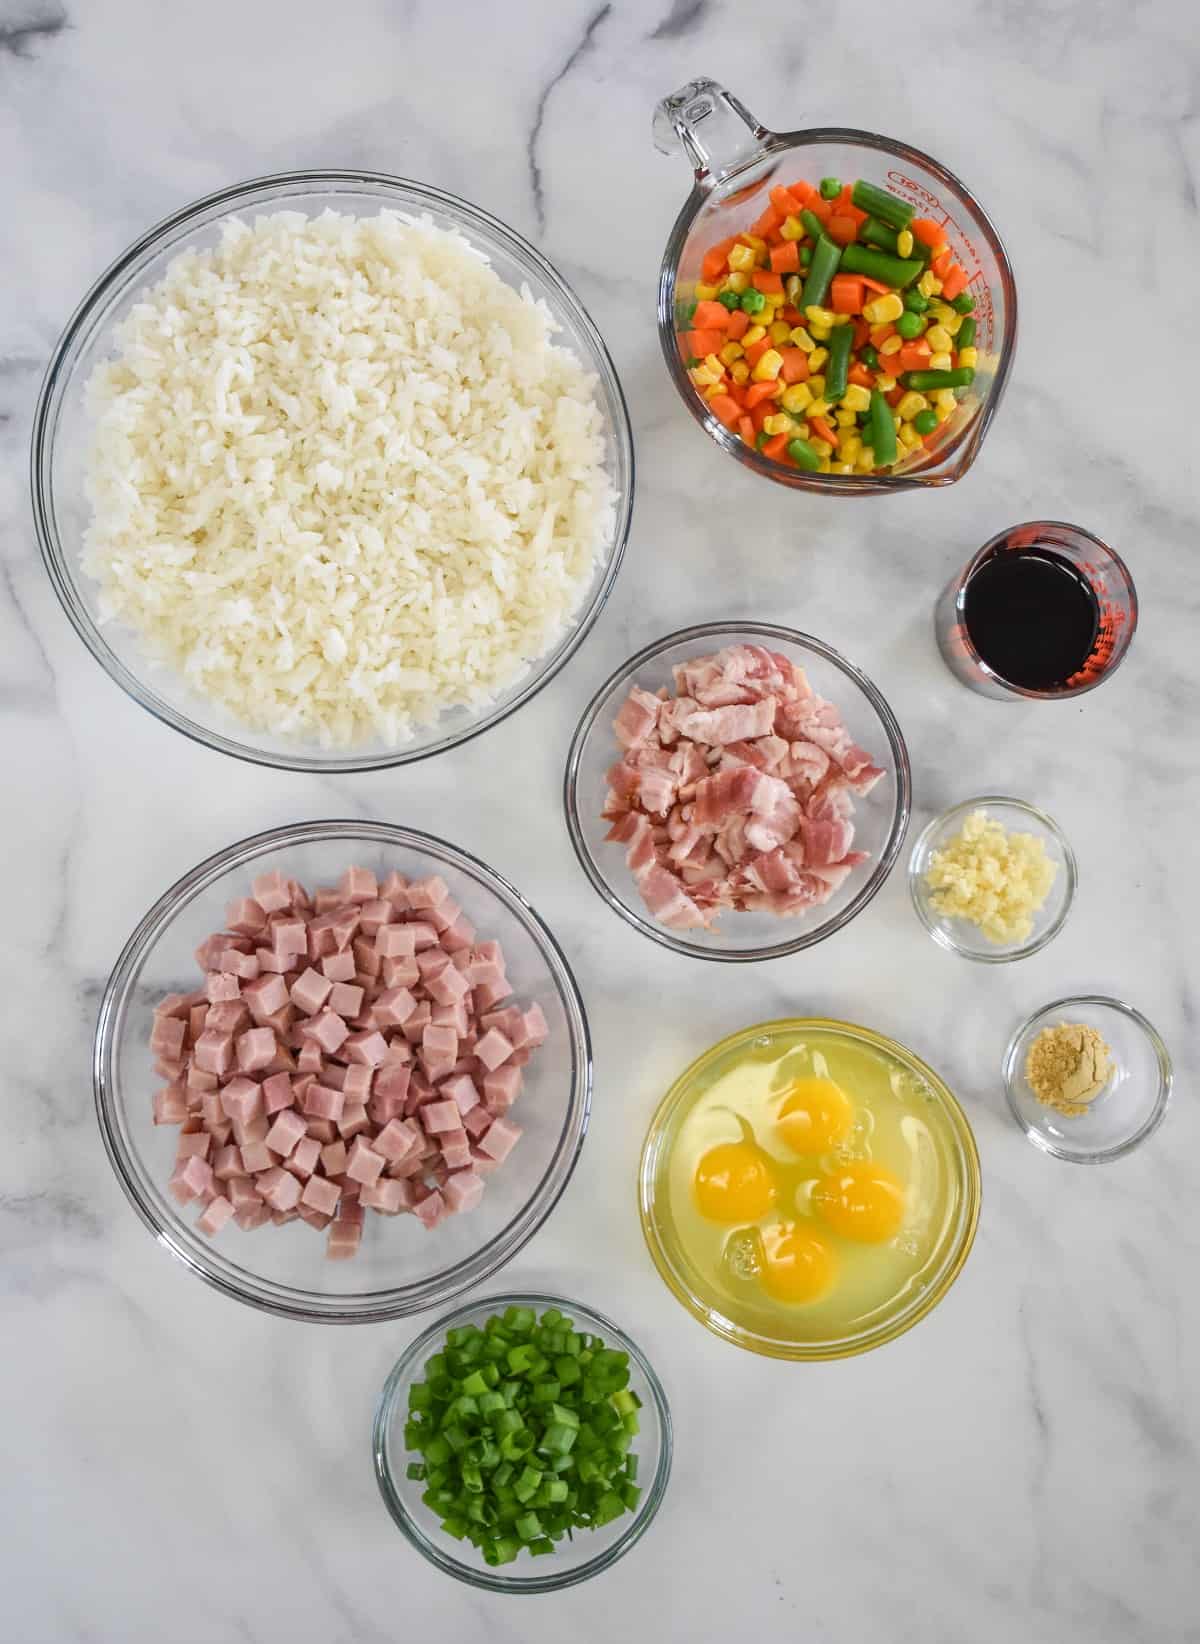 The ingredients for the ham fried rice prepped and separated in glass containers arranged on a white table.